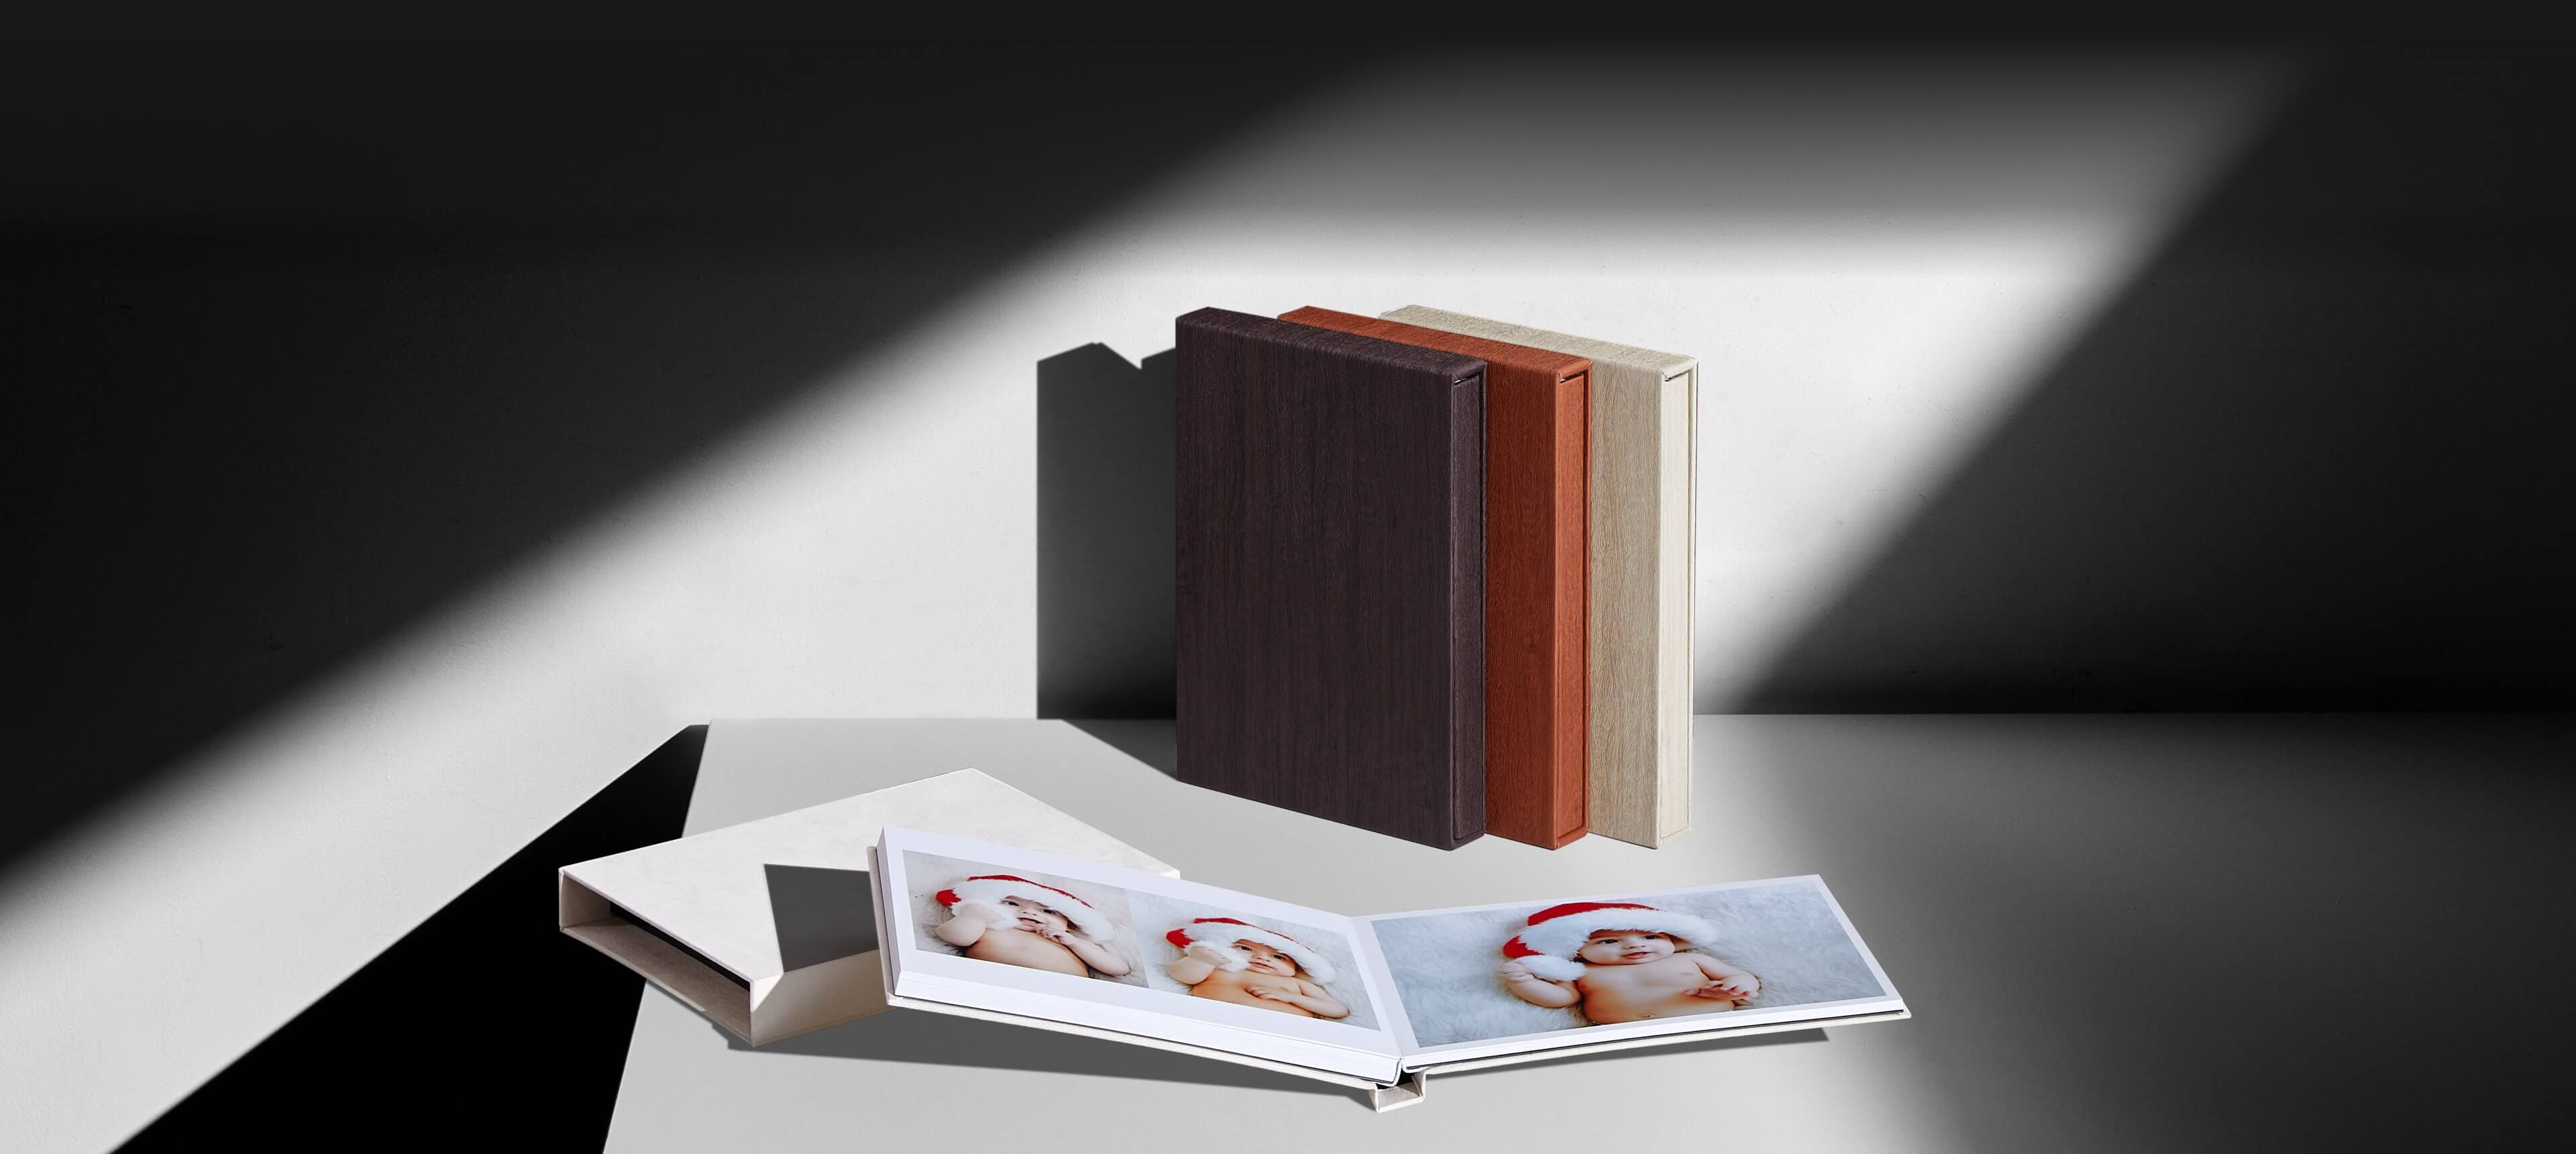 a slipcase album set showing a photo album opened resting on a cream suede box